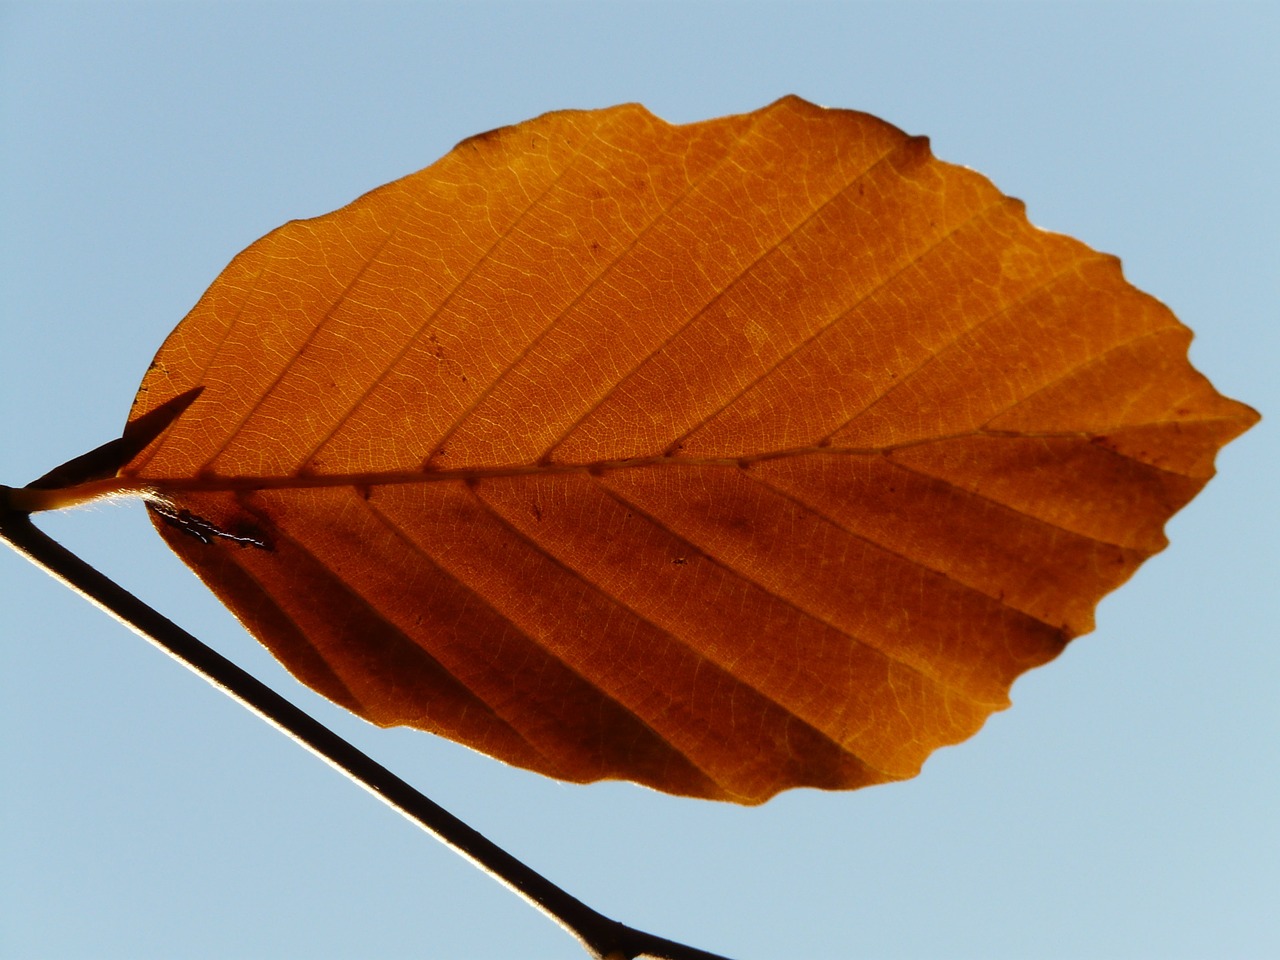 leaf lonely alone free photo